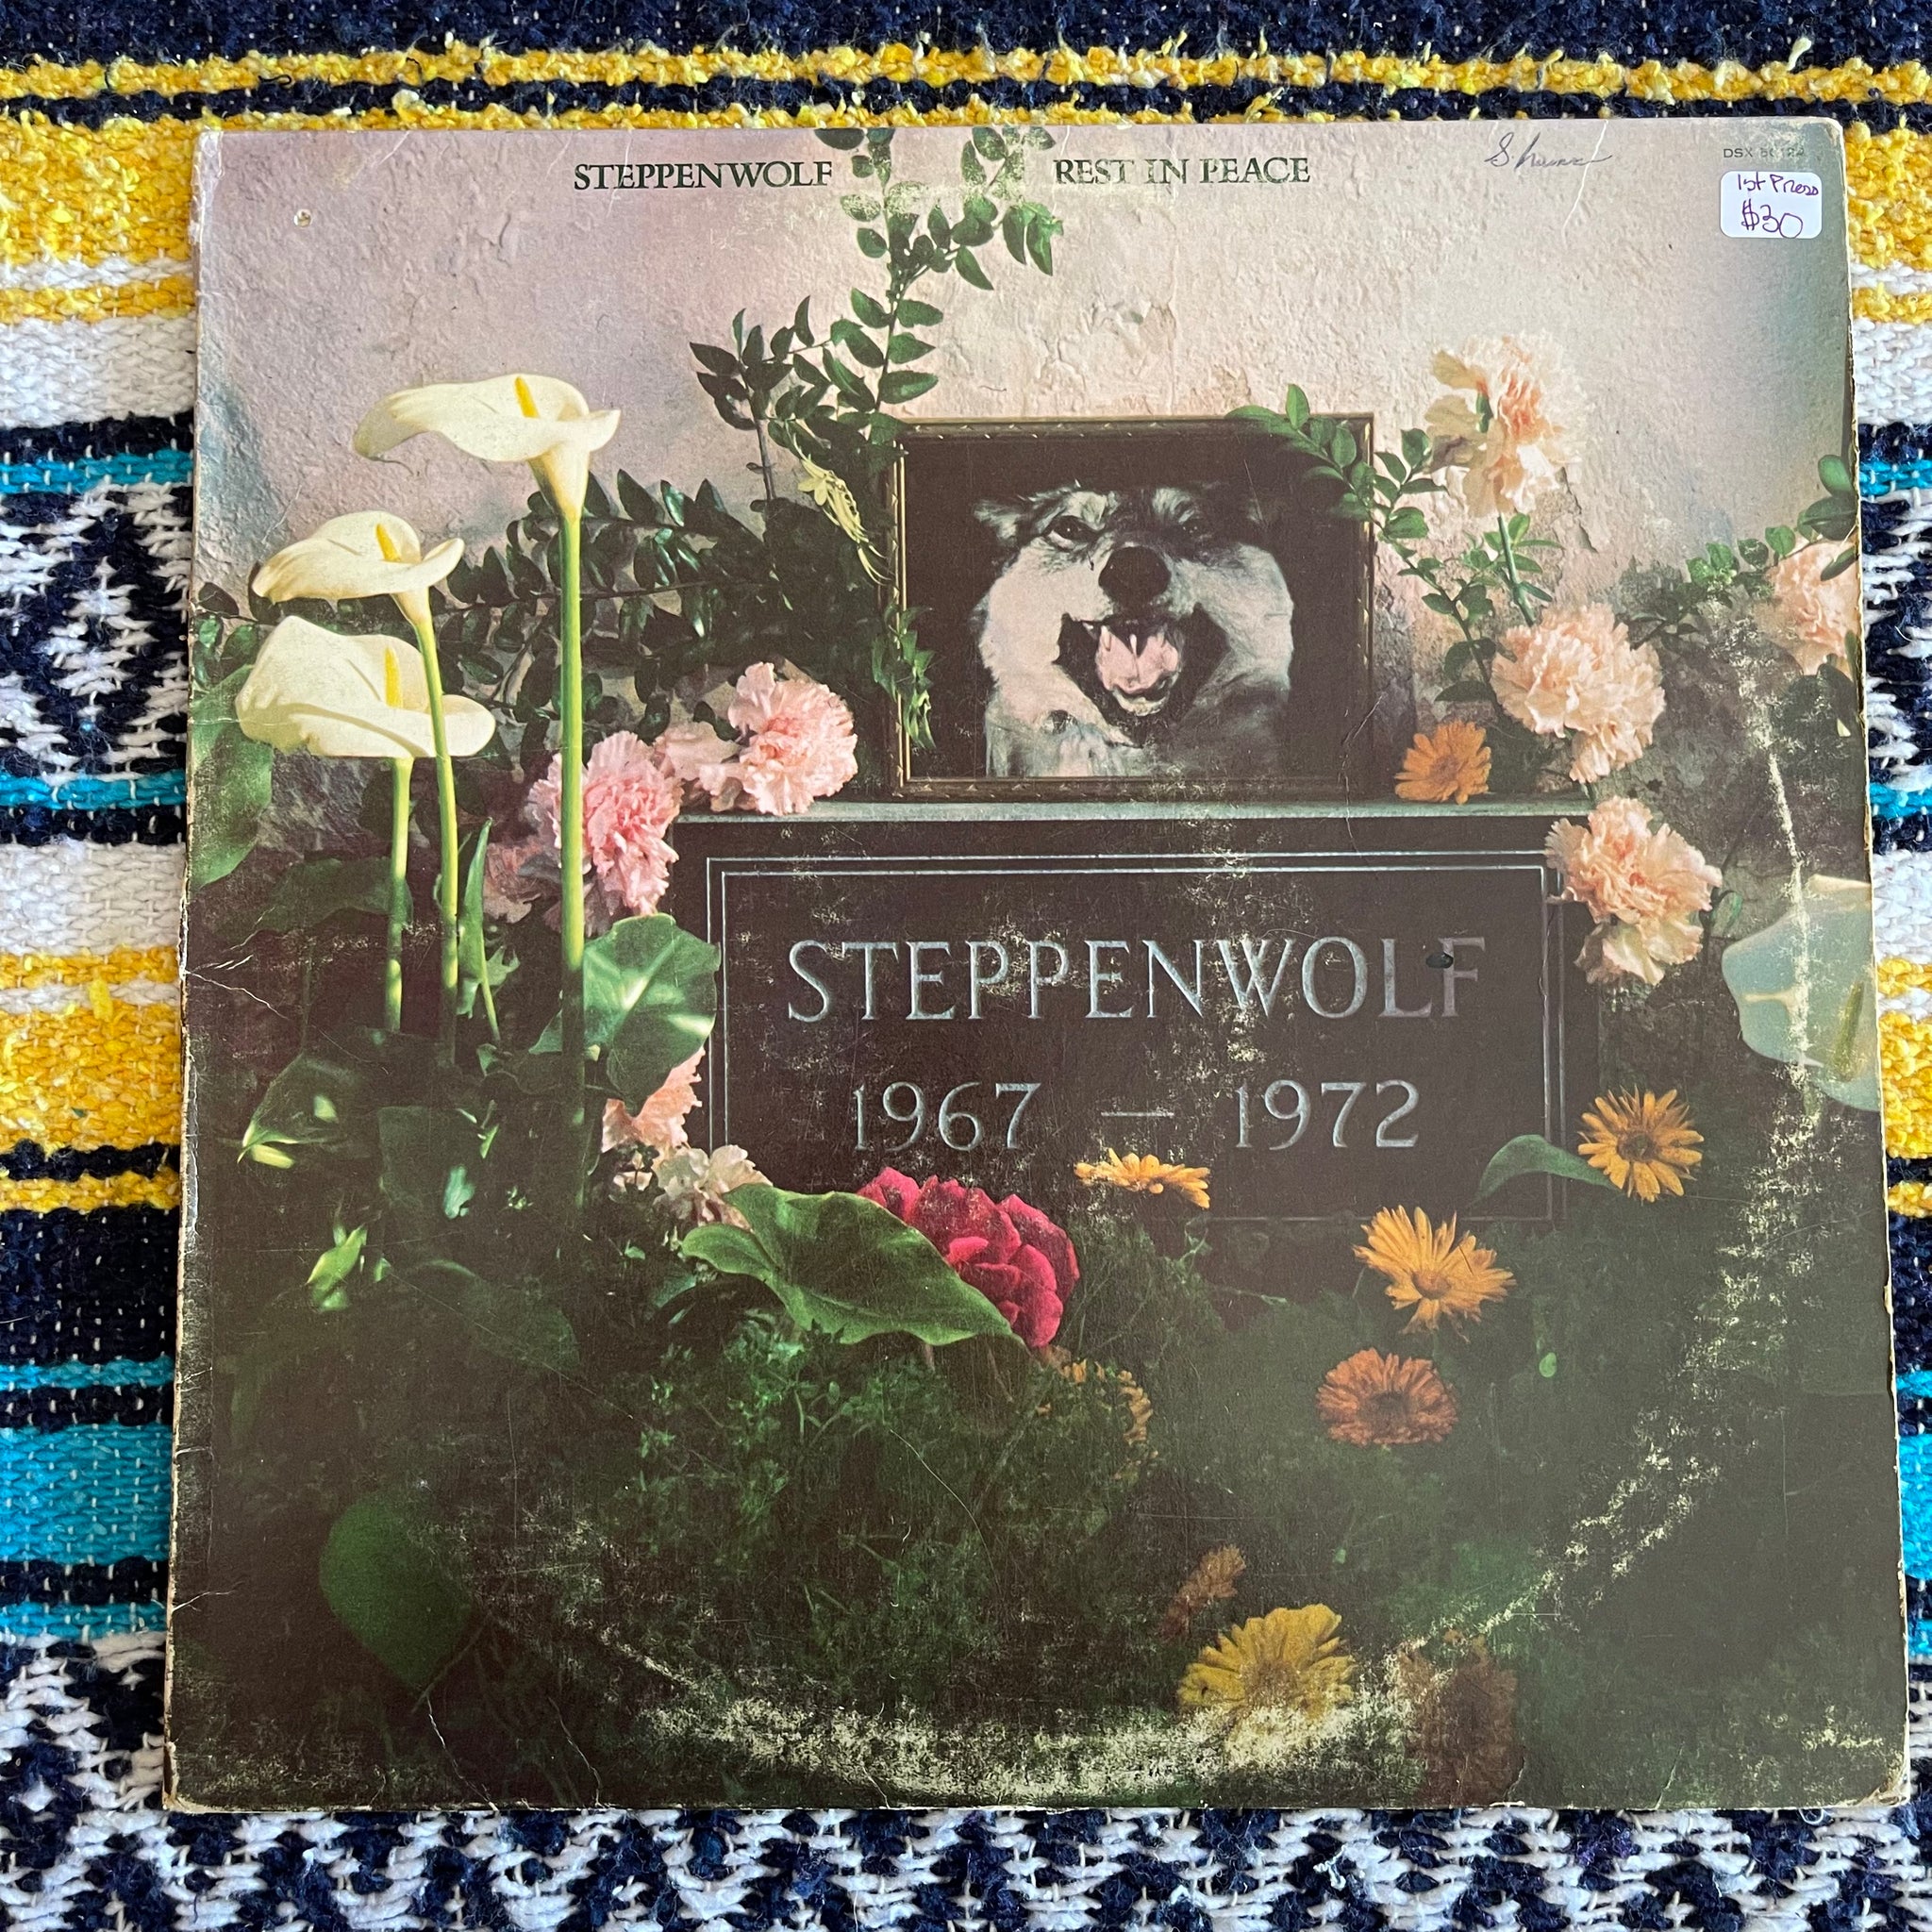 Steppenwolf-Rest in Peace 1967-1972